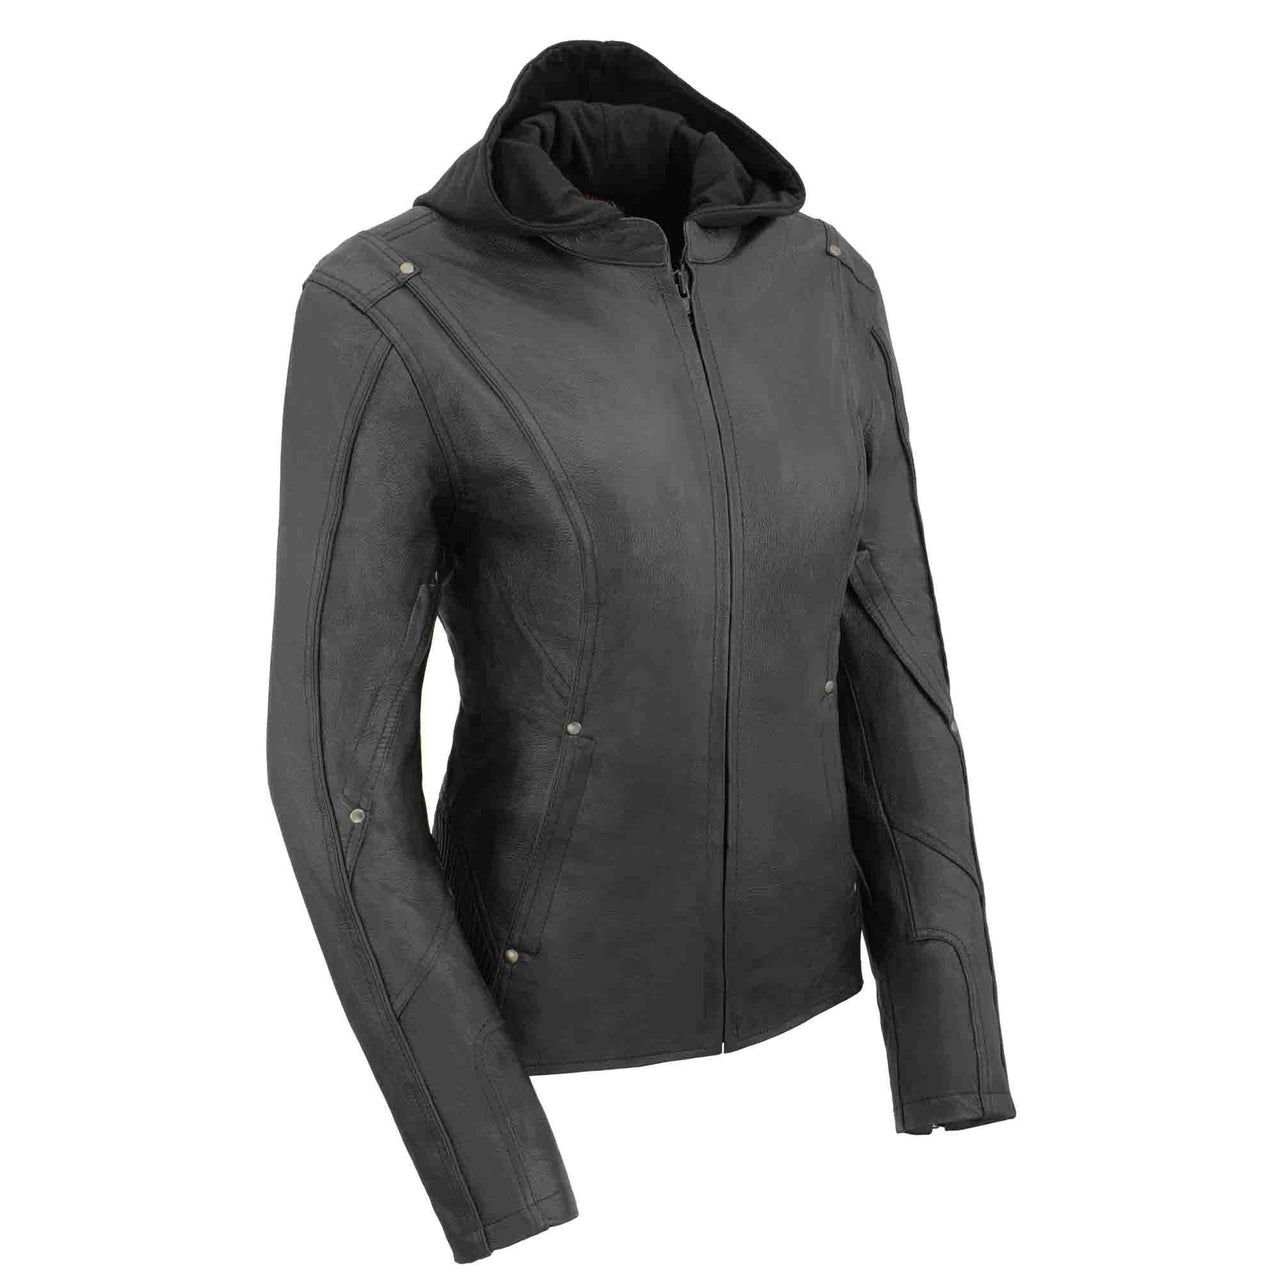 Women Black 3/4 Hooded Leather Jacket with Side Stetch Fit - HighwayLeather